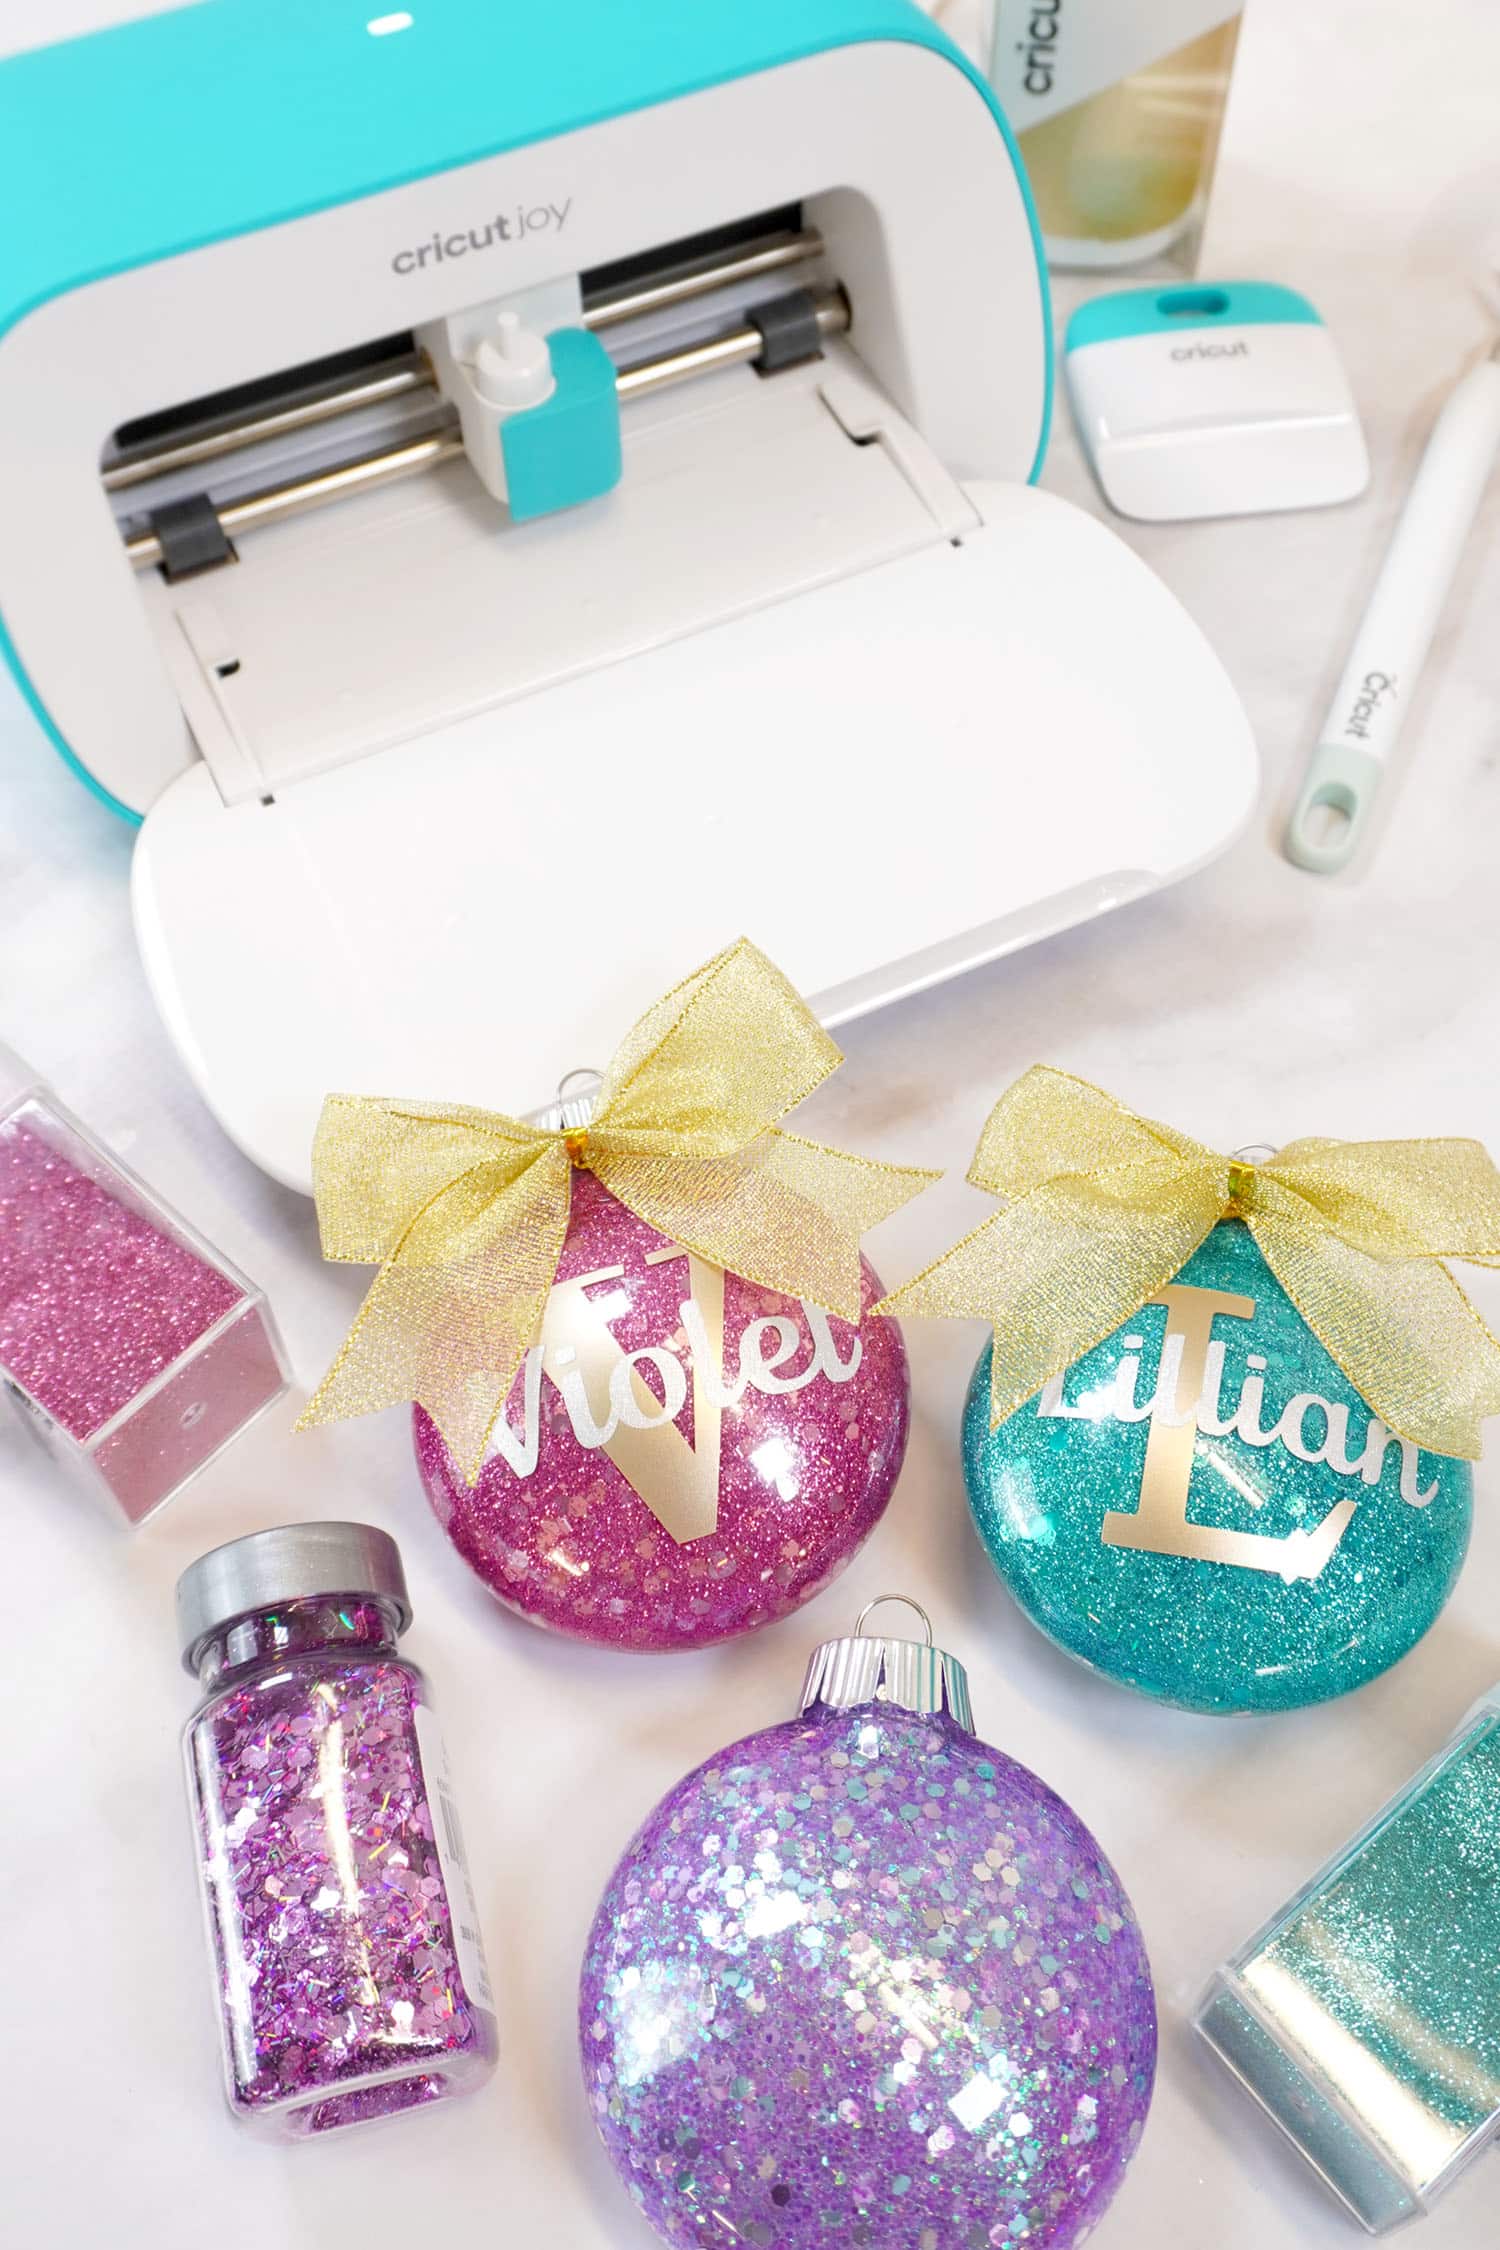 Cricut Joy machine and glitter Christmas ornaments in various colors